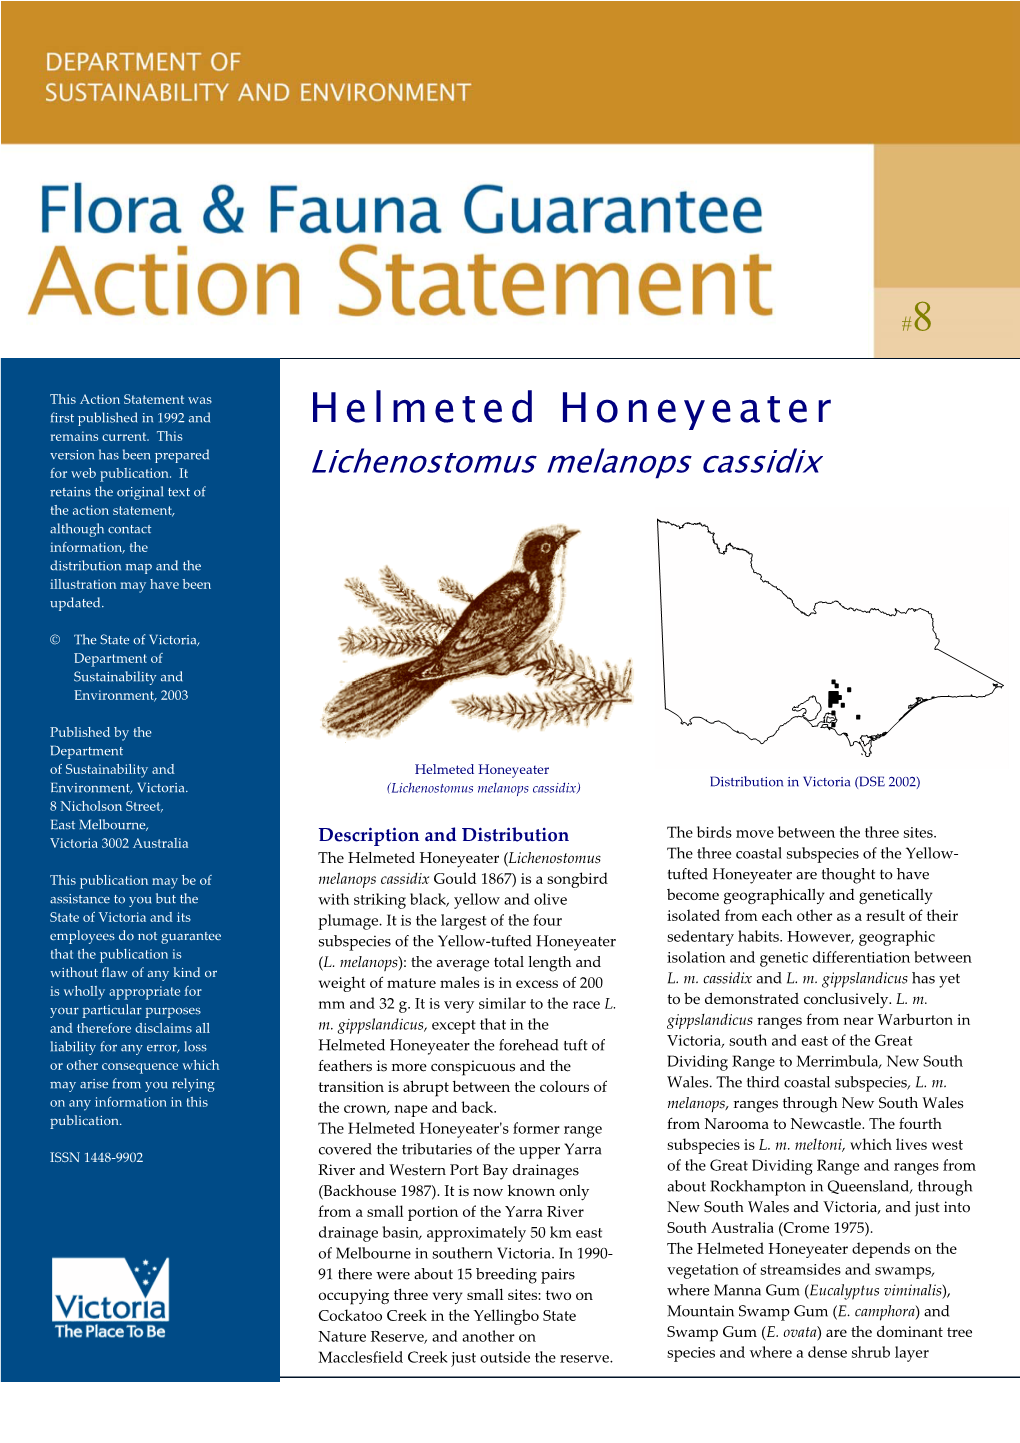 Helmeted Honeyeater Version Has Been Prepared for Web Publication